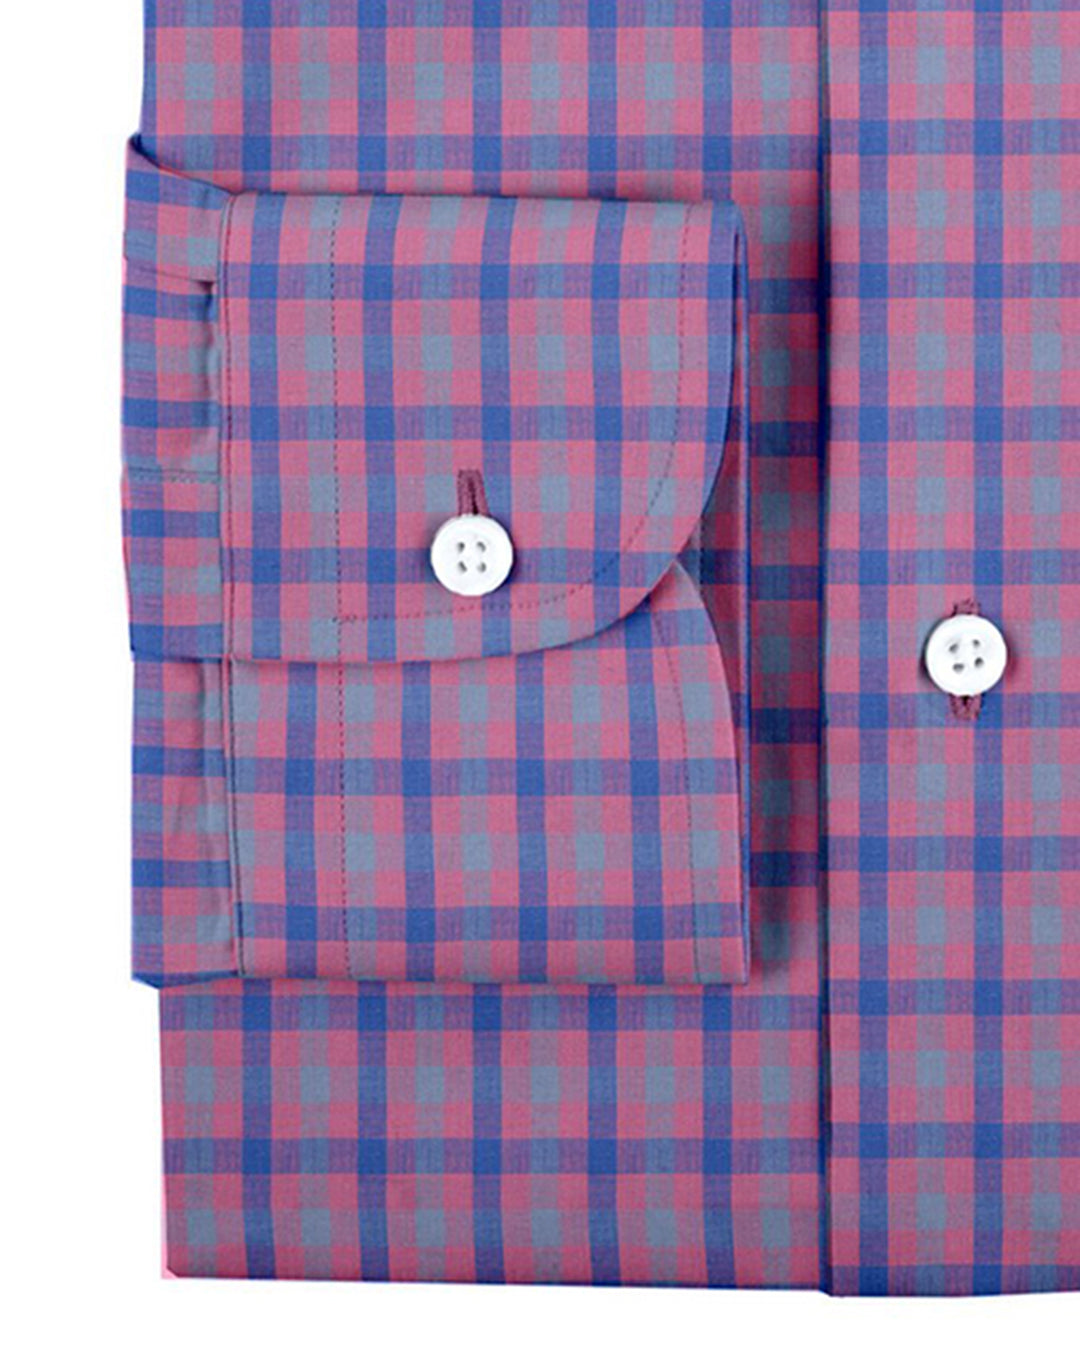 Cuff of the custom linen shirt for men in pink and blue gingham by Luxire Clothing